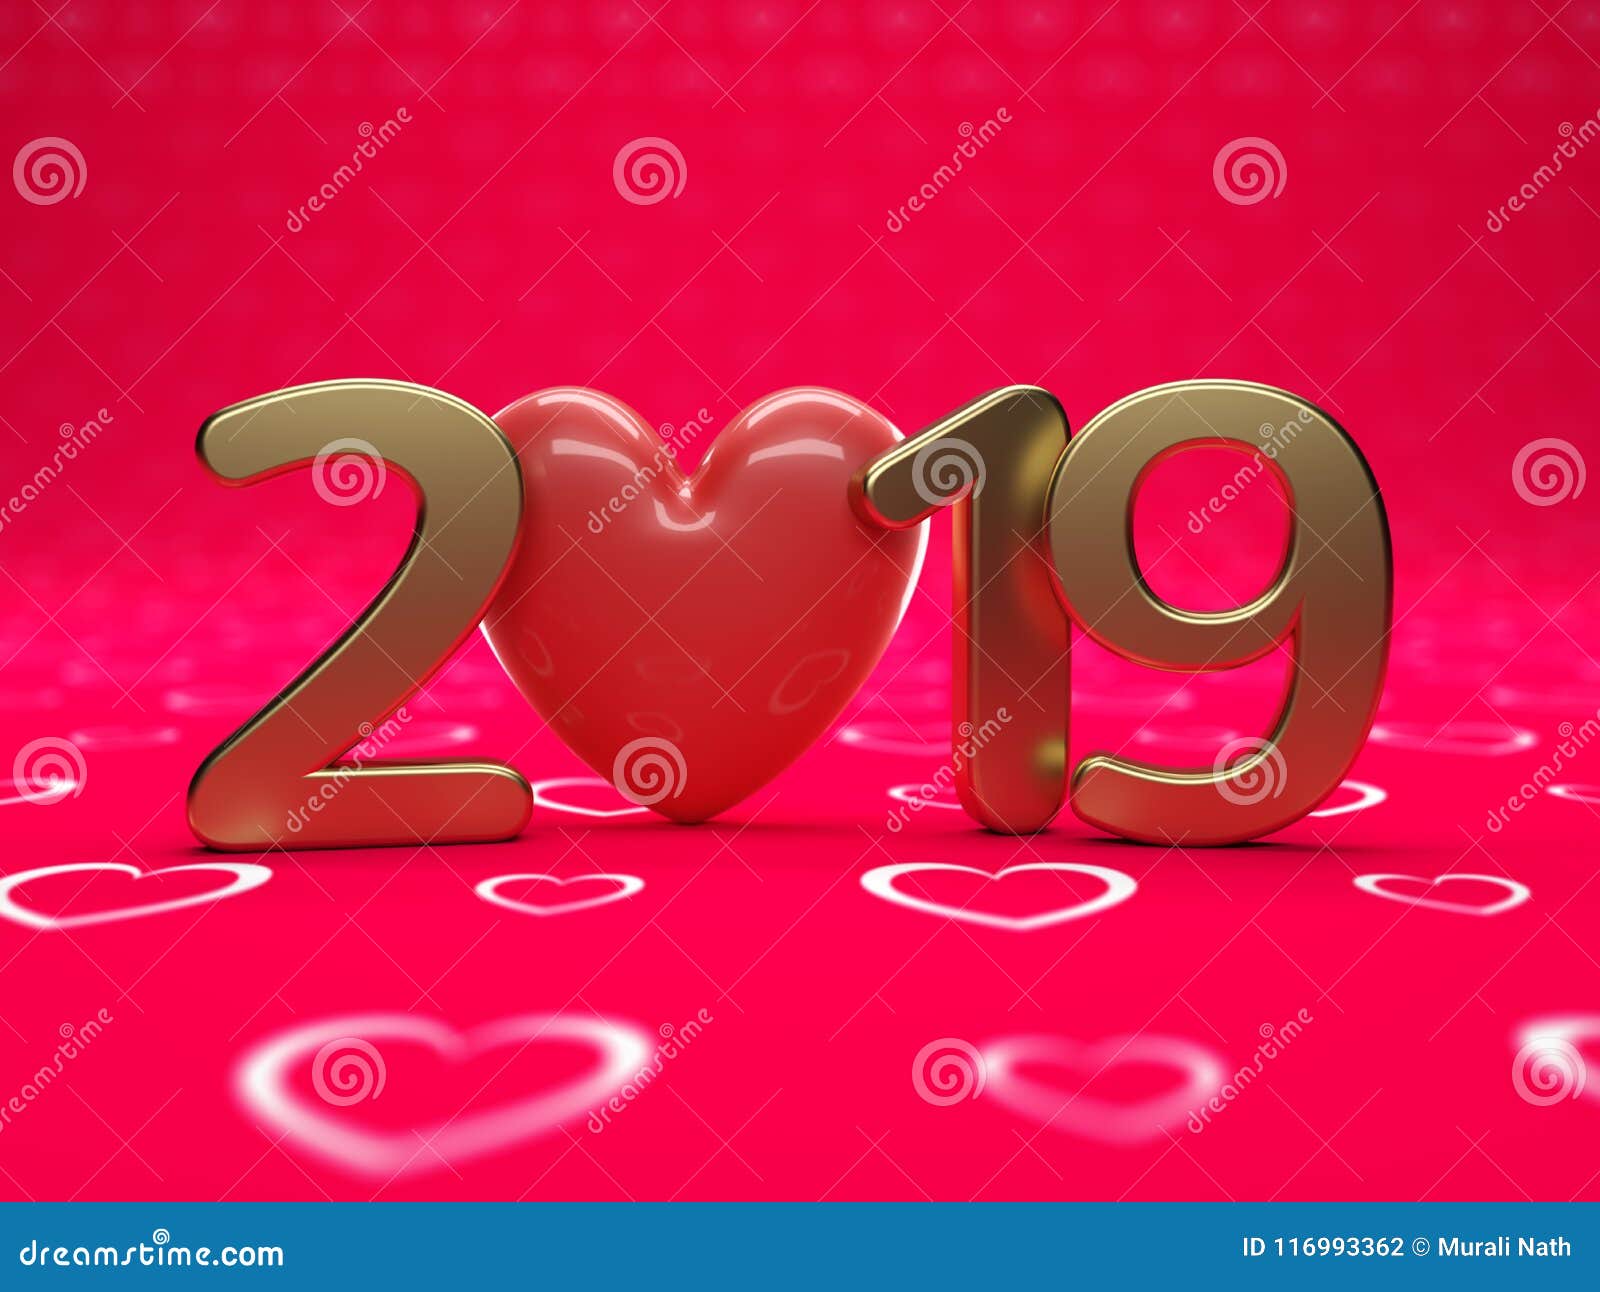 Happy New Year 19 With Heart Symbol Stock Illustration Illustration Of Concept Poster